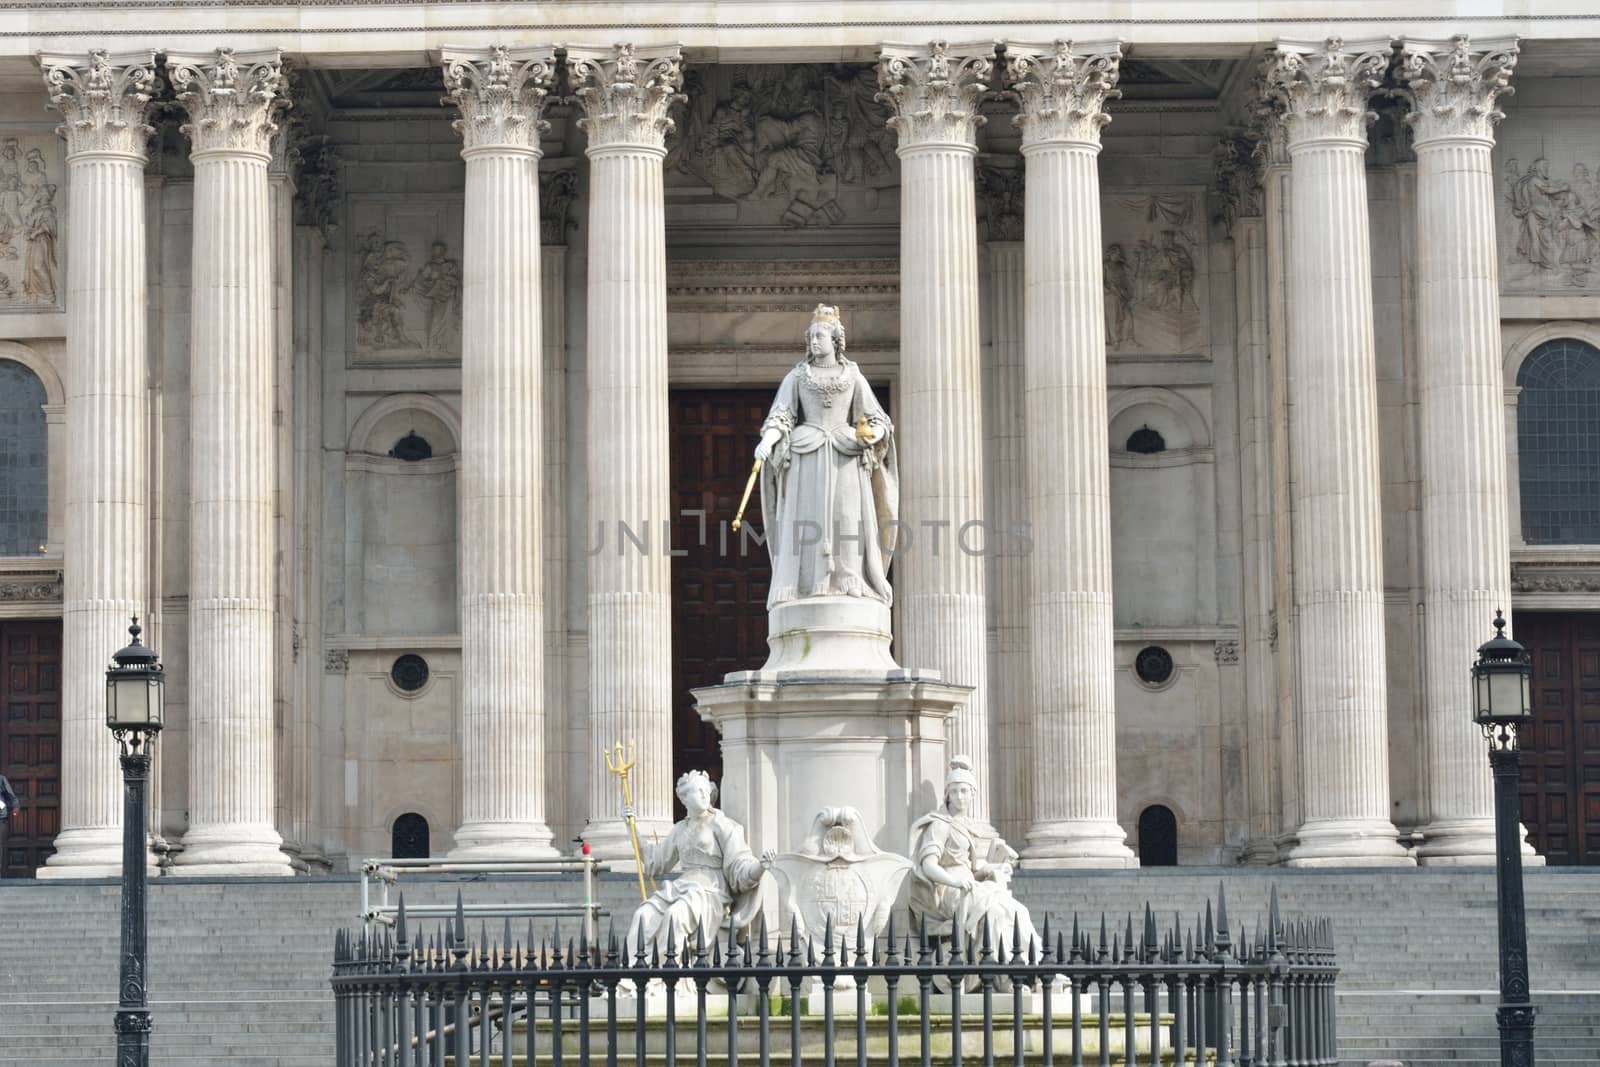  Queen Victoria  in front of St Pauls with columns behind by pauws99